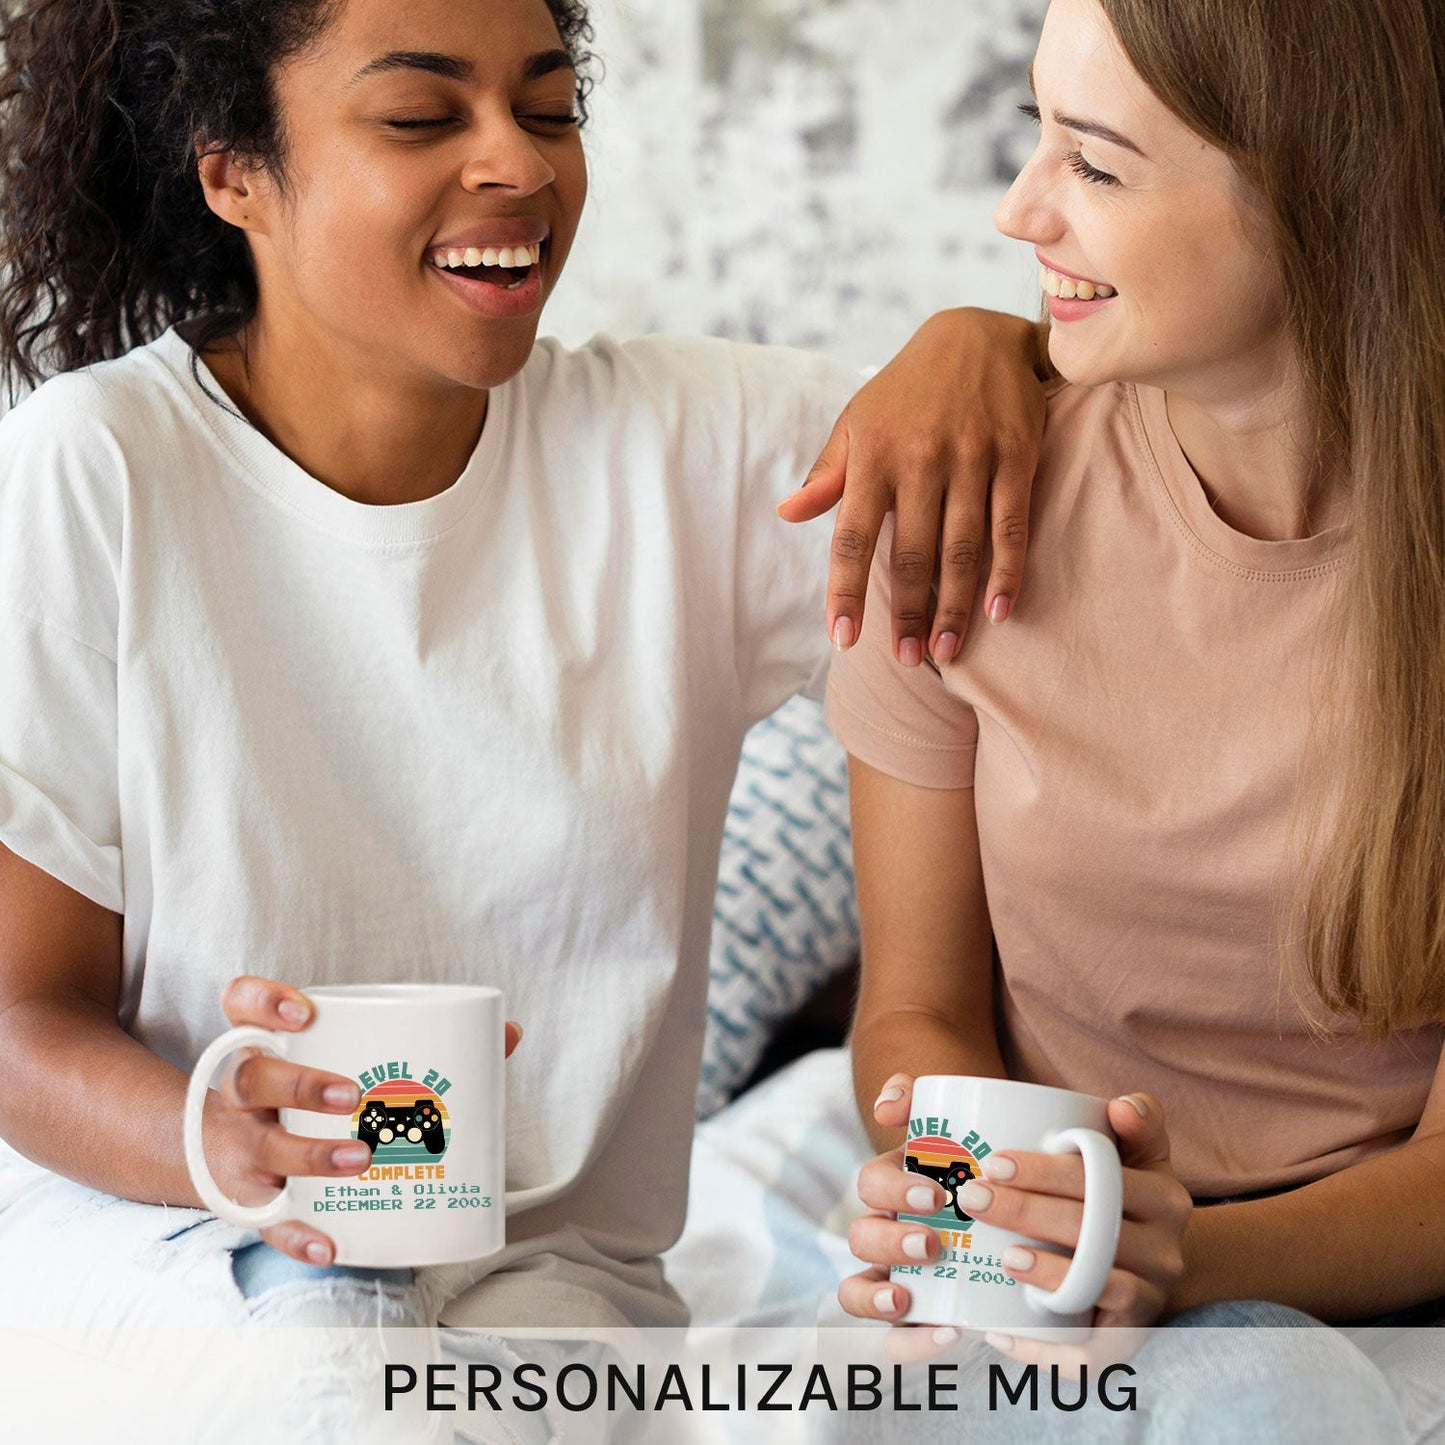 Level 20 Complete - Personalized 20 Year Anniversary gift for him for her - Custom Mug - MyMindfulGifts